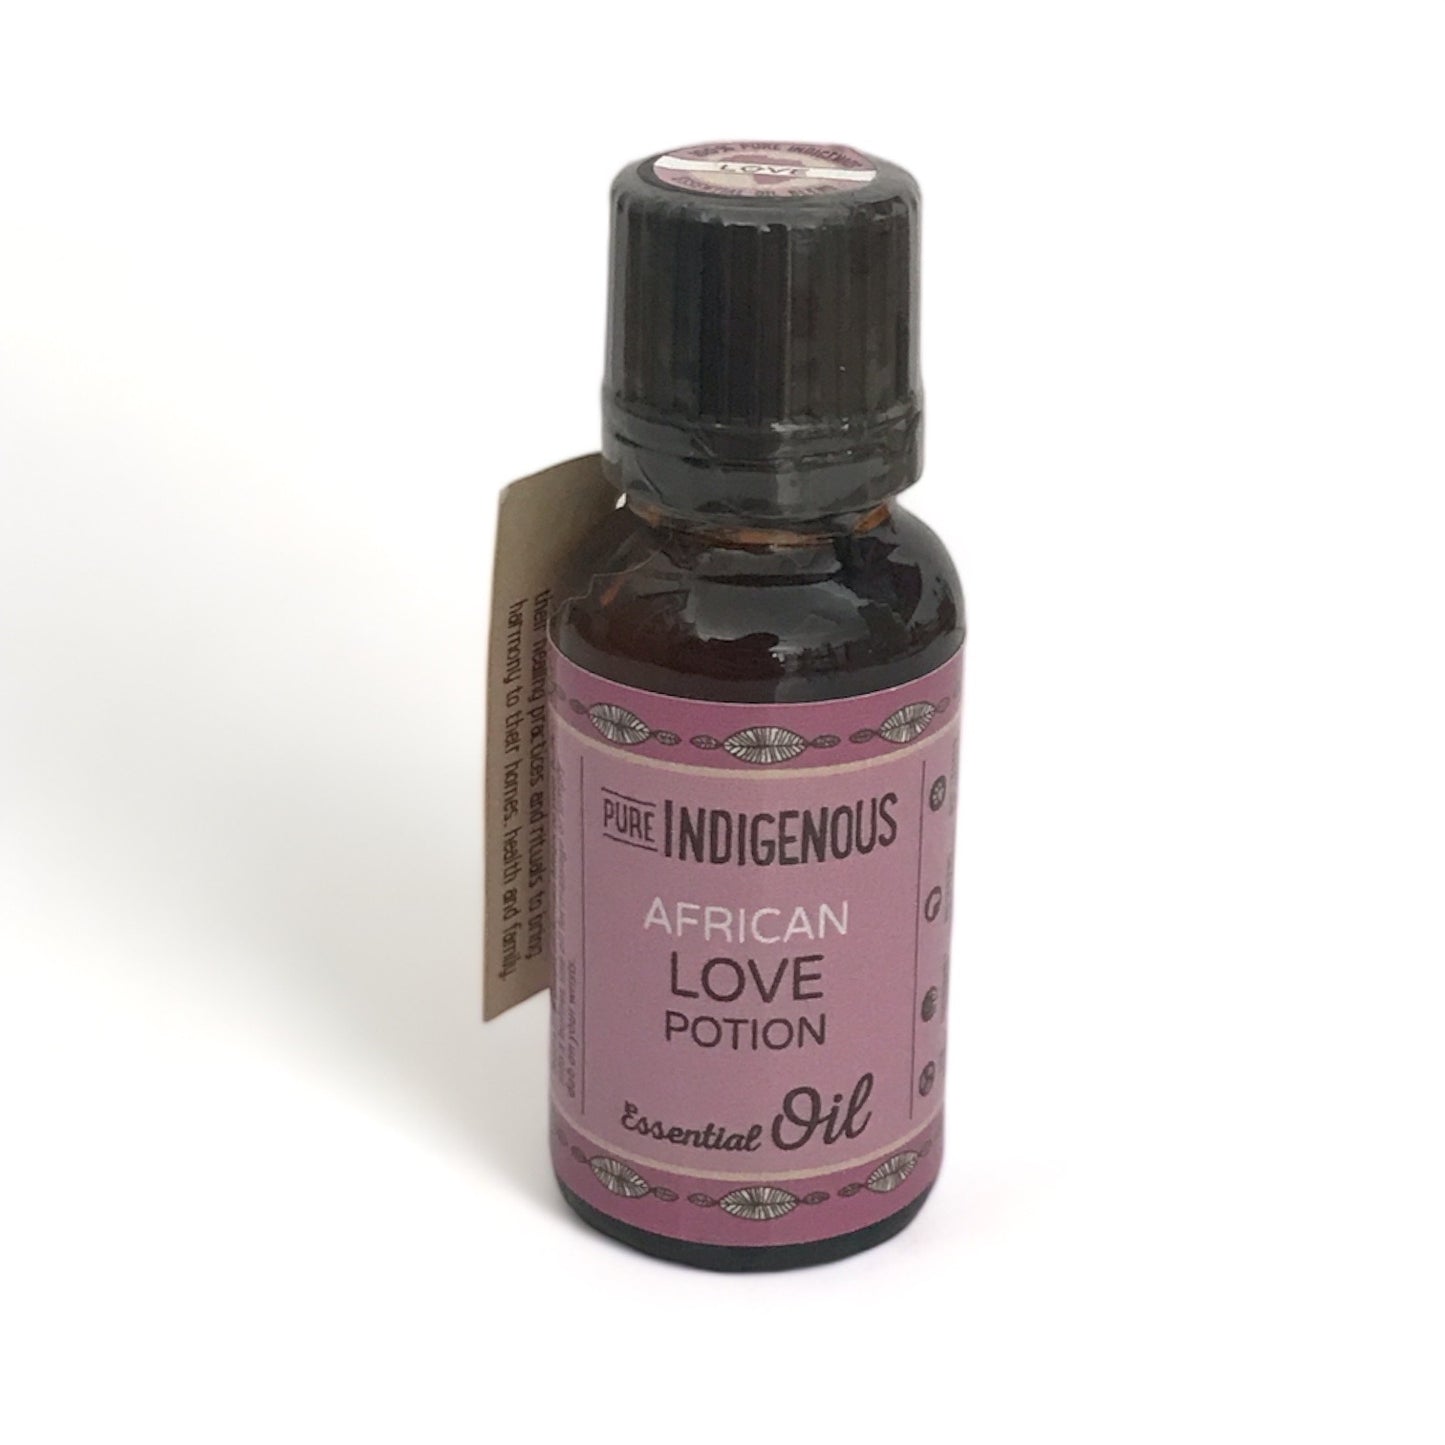 African Love Potion Essential Oil - Pure Indigenous